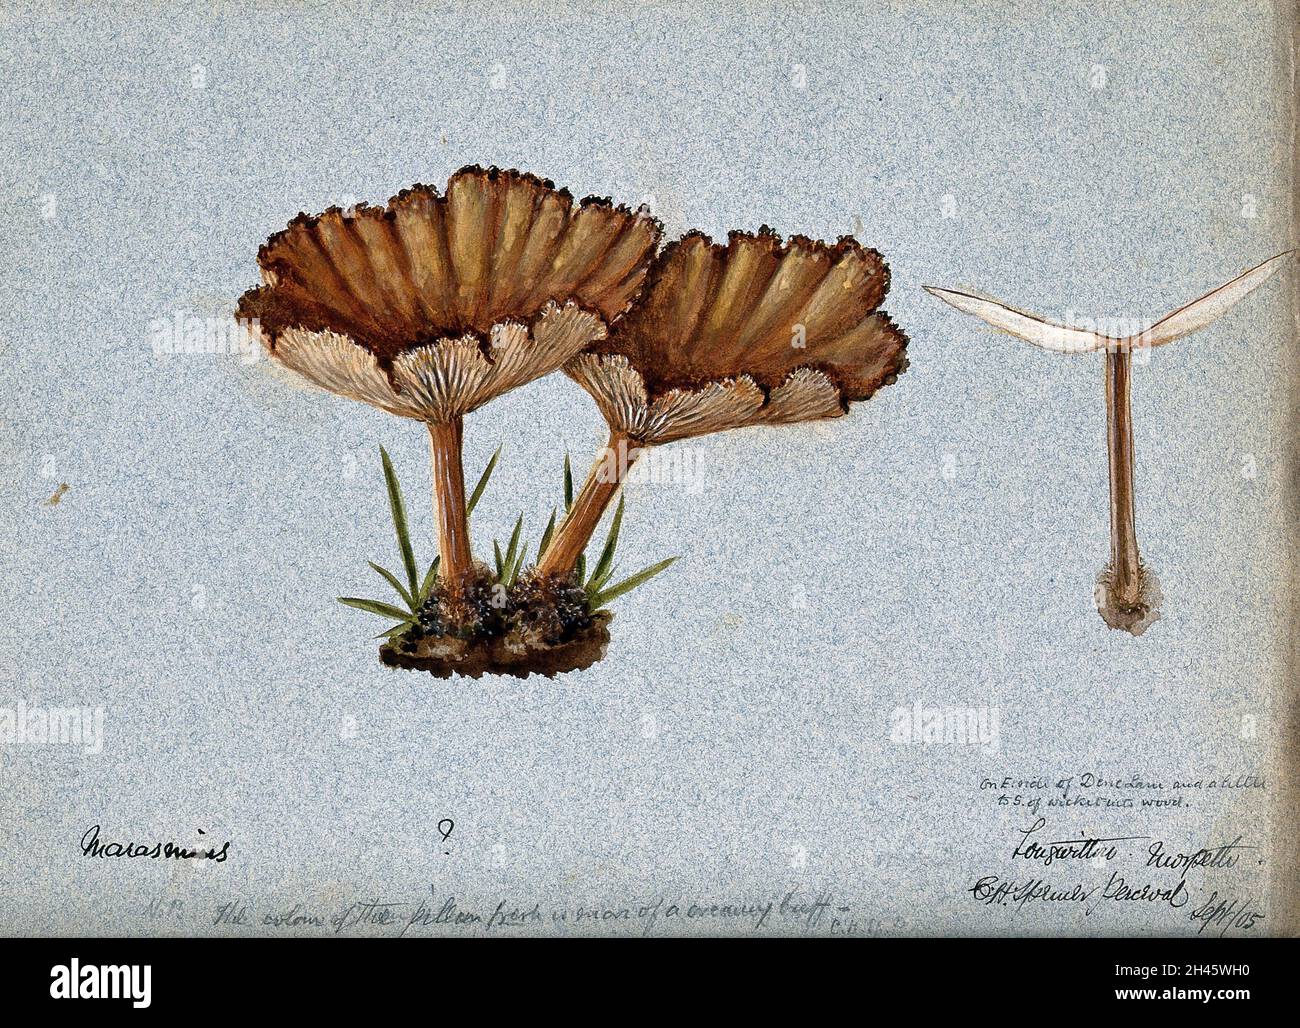 A fungus (Marasmius species?): three fruiting bodies, one sectioned. Watercolour by C. H. Spencer Perceval, 1905. Stock Photo